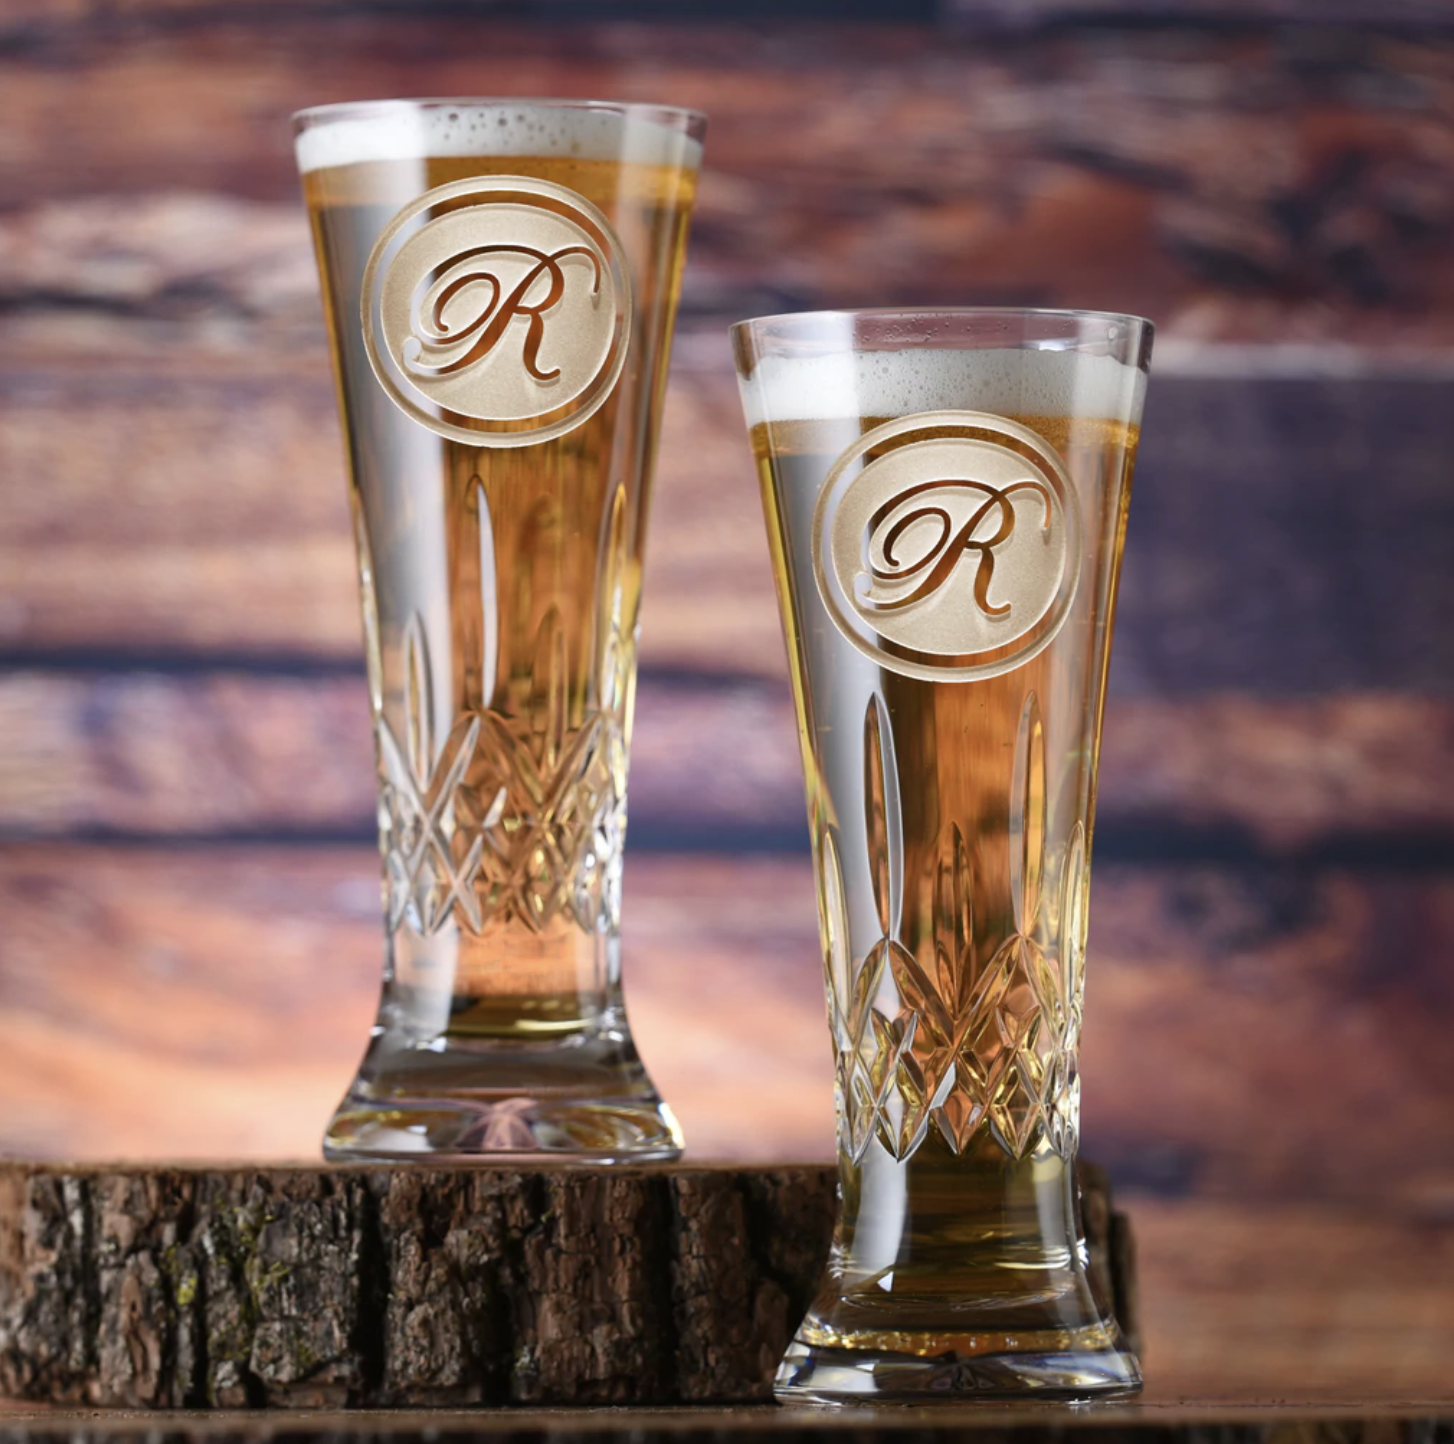 Can Shaped Beer Glass Personalized - I Love You Like XO Print Engraved